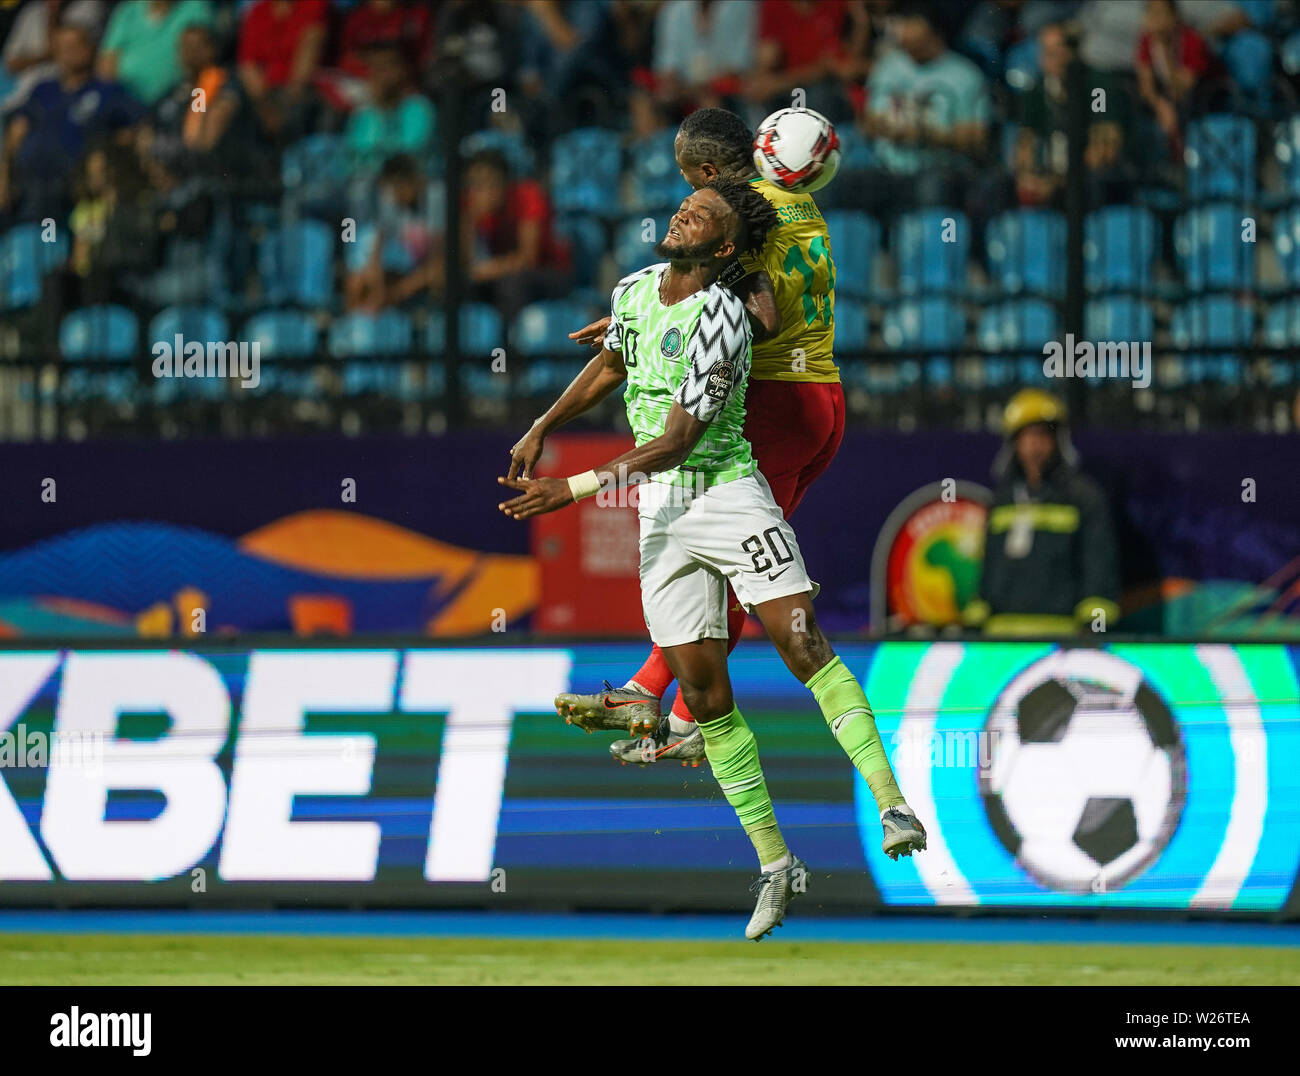 Alexandria, Egypt. 6th July 2019. FRANCE OUT July 6, 2019: Christian Mougang Bassogog of Cameroon and Awaziem Chidozie Collins of Nigeria challenging for the ball during the 2019 African Cup of Nations match between Cameroon and Nigeria at the Alexanddria Stadium in Alexandria, Egypt. Ulrik Pedersen/CSM. Stock Photo